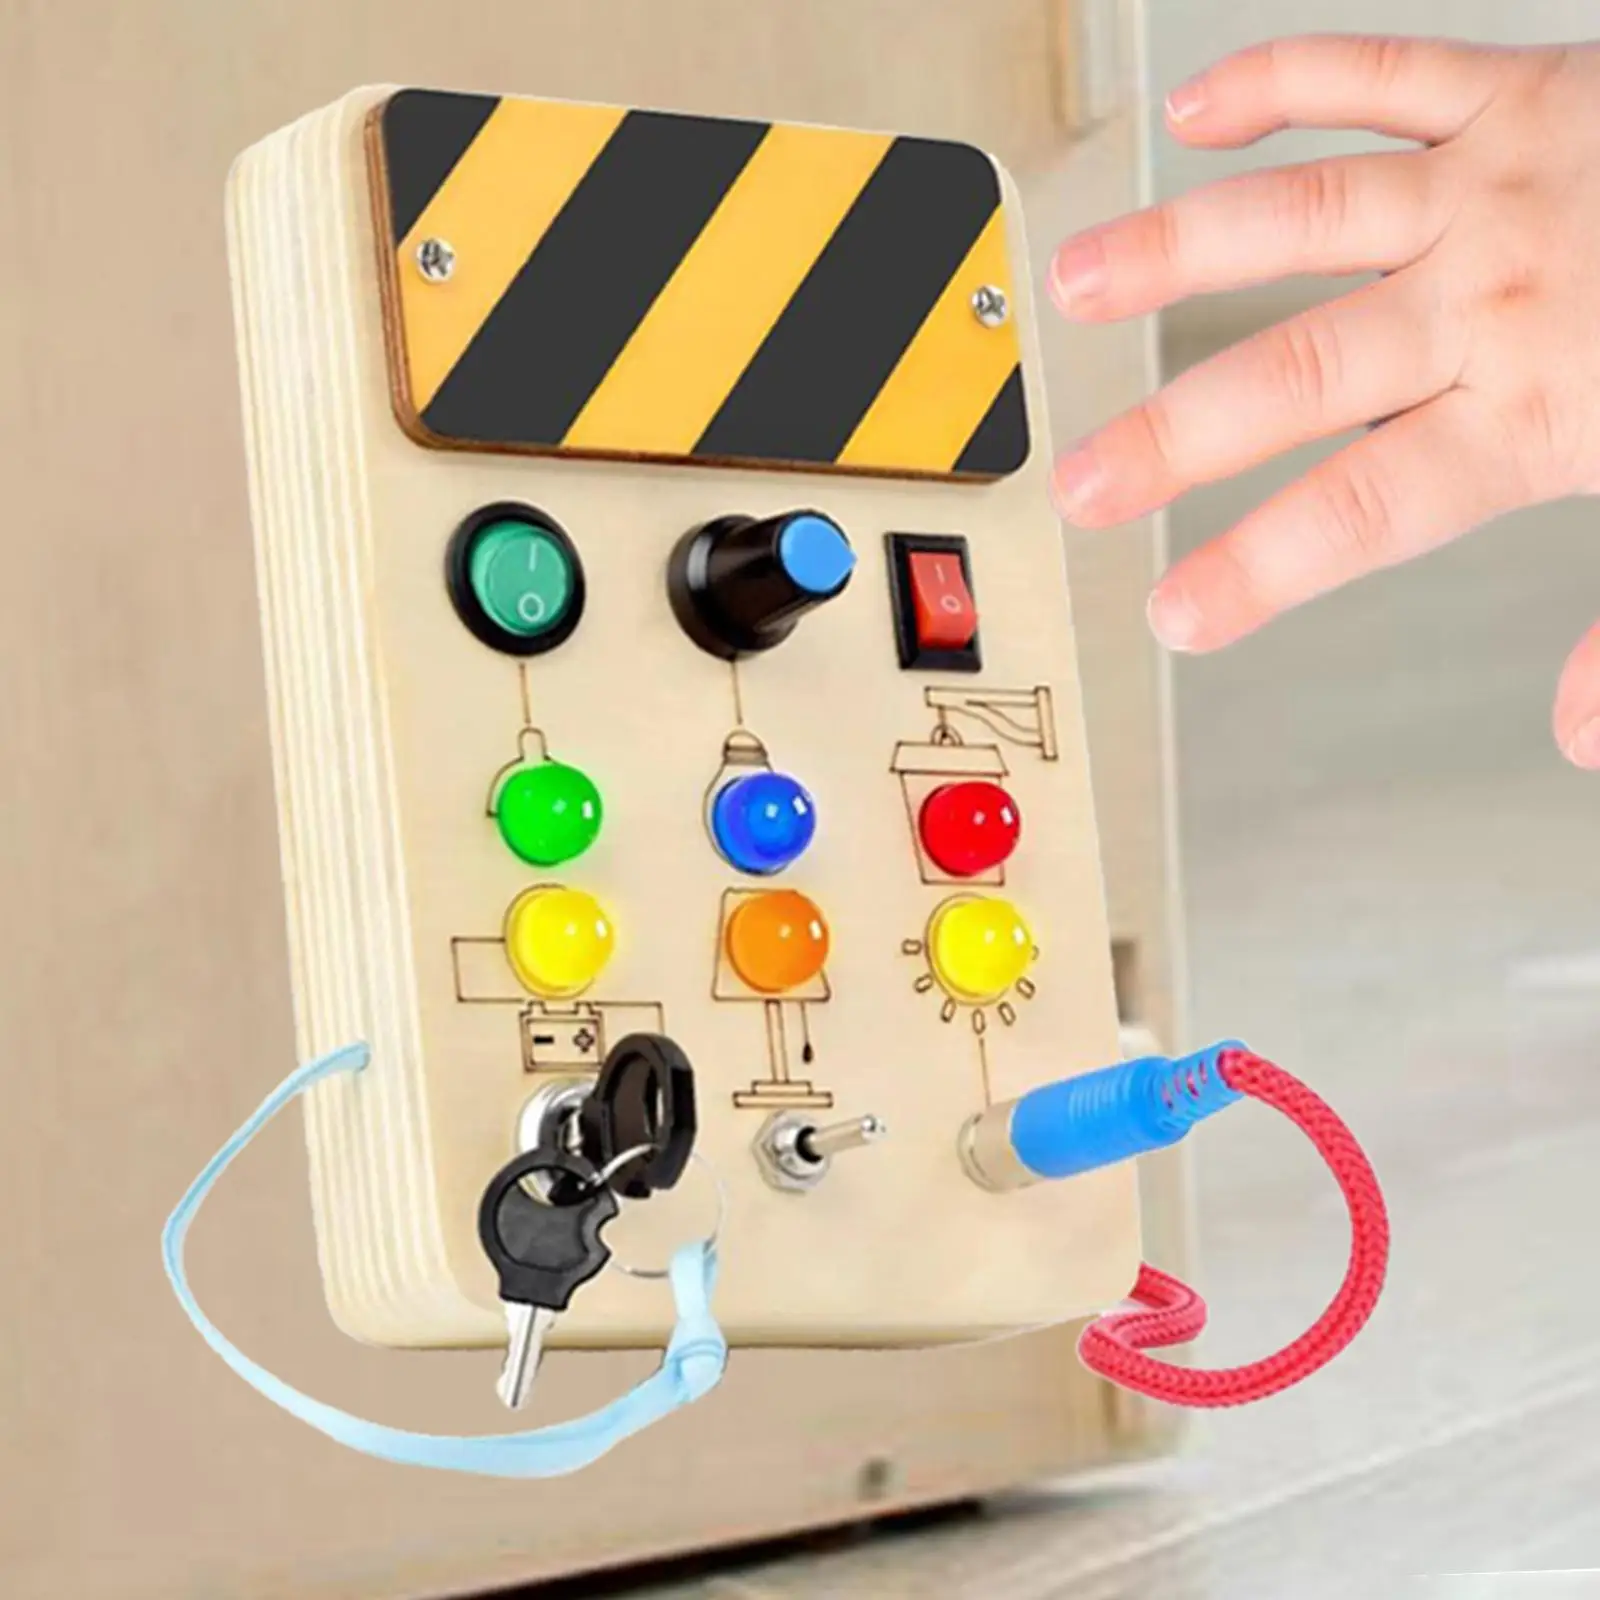 LED Switch Board Activities Toggle Switch Fine Motor Skills for Toddler Kids